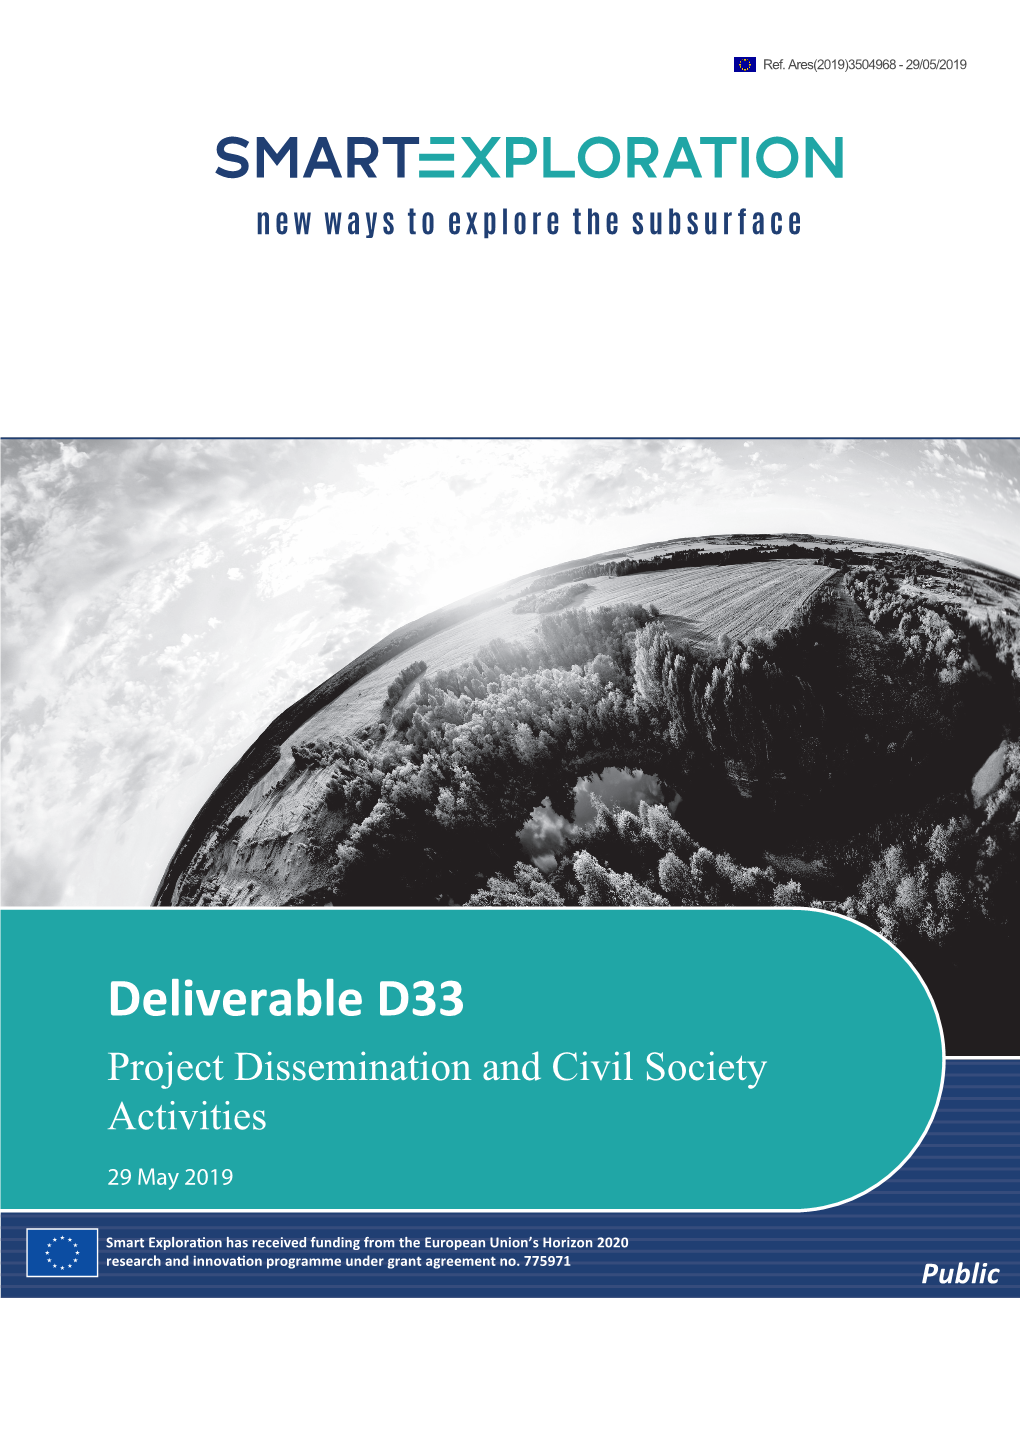 Deliverable D33 Project Dissemination and Civil Society Activities